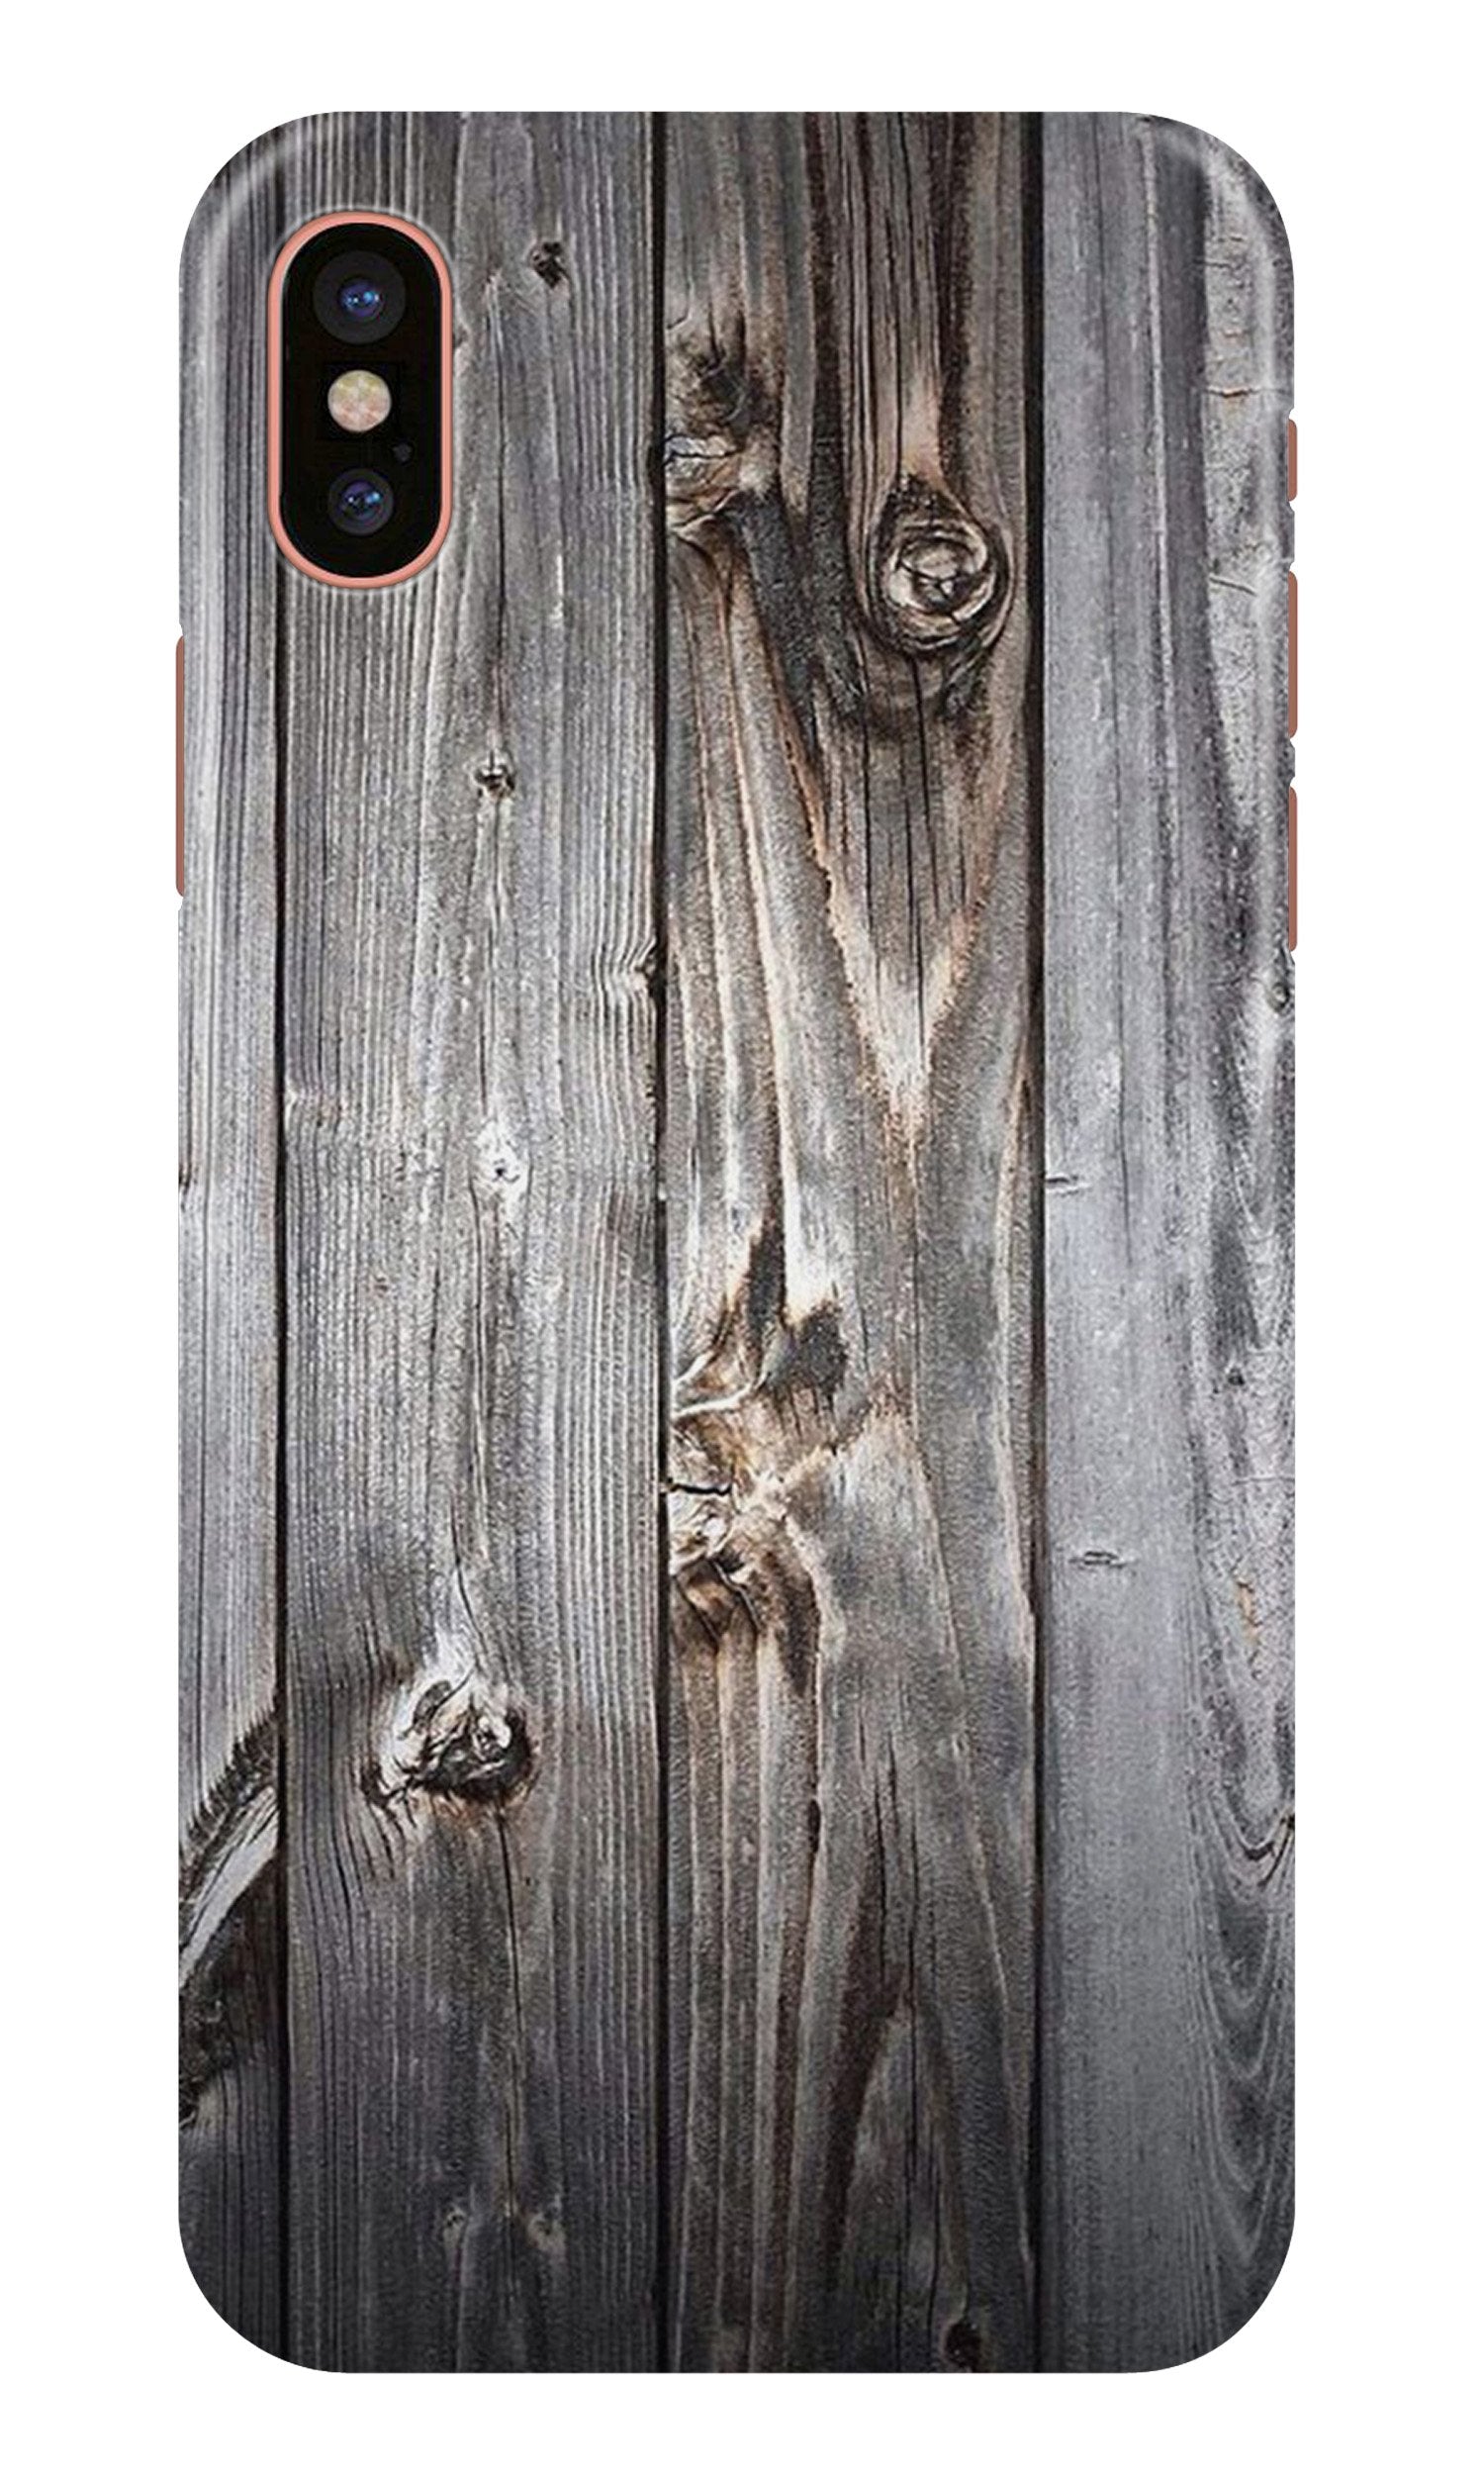 Wooden Look Case for iPhone X(Design - 114)